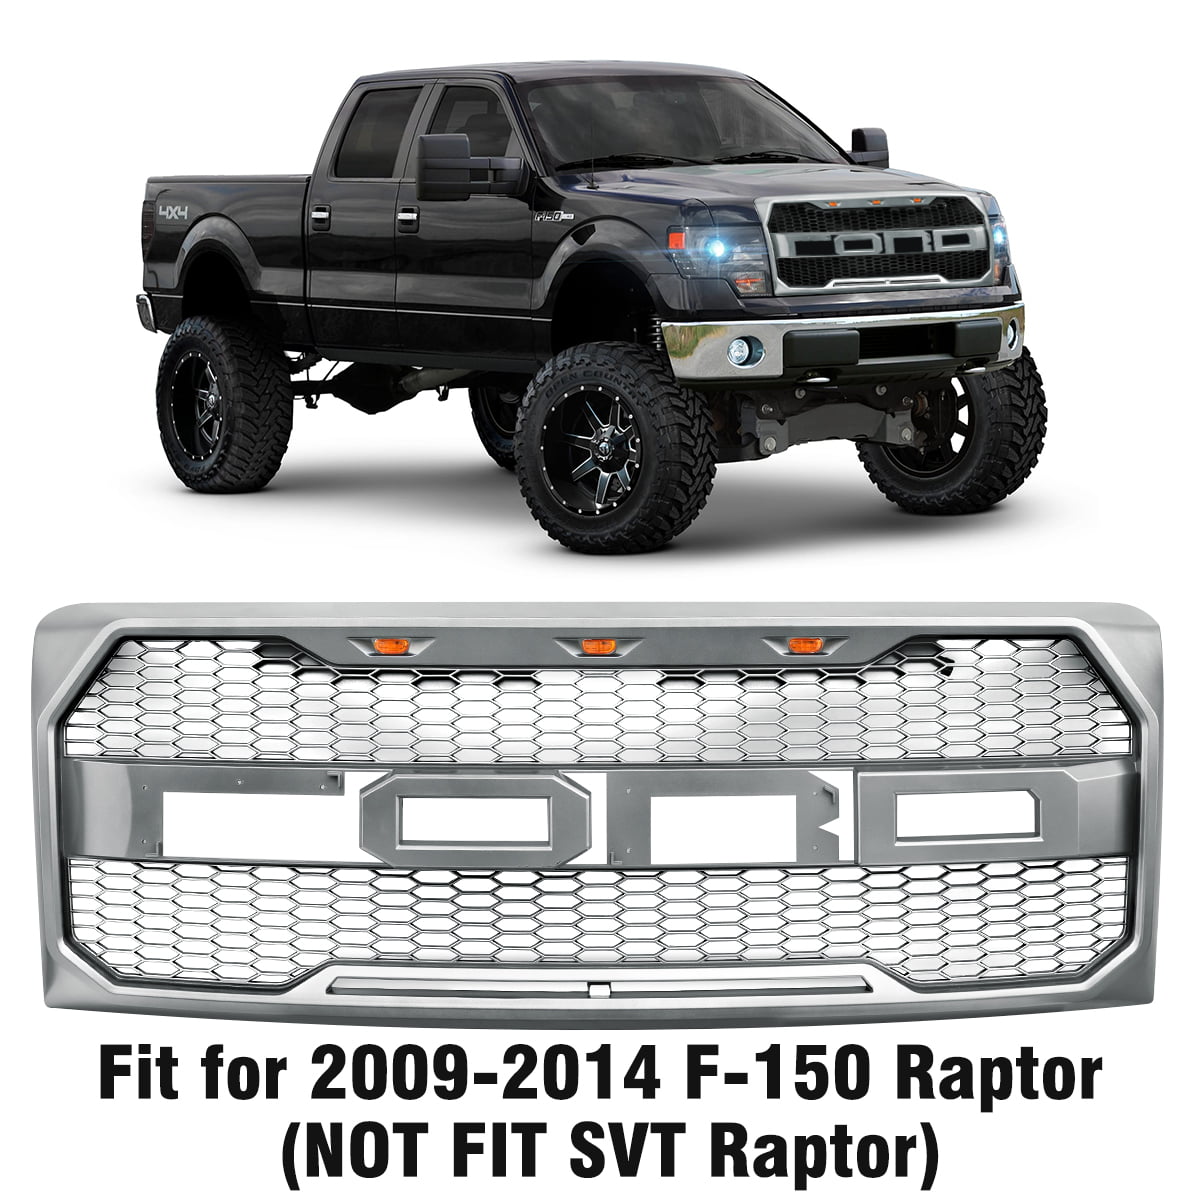 Gloss Black Front Grille Fits 2009-2014 FORD F150 Raptor Style Grill Kits With Amber LED Light and F&R Letter 